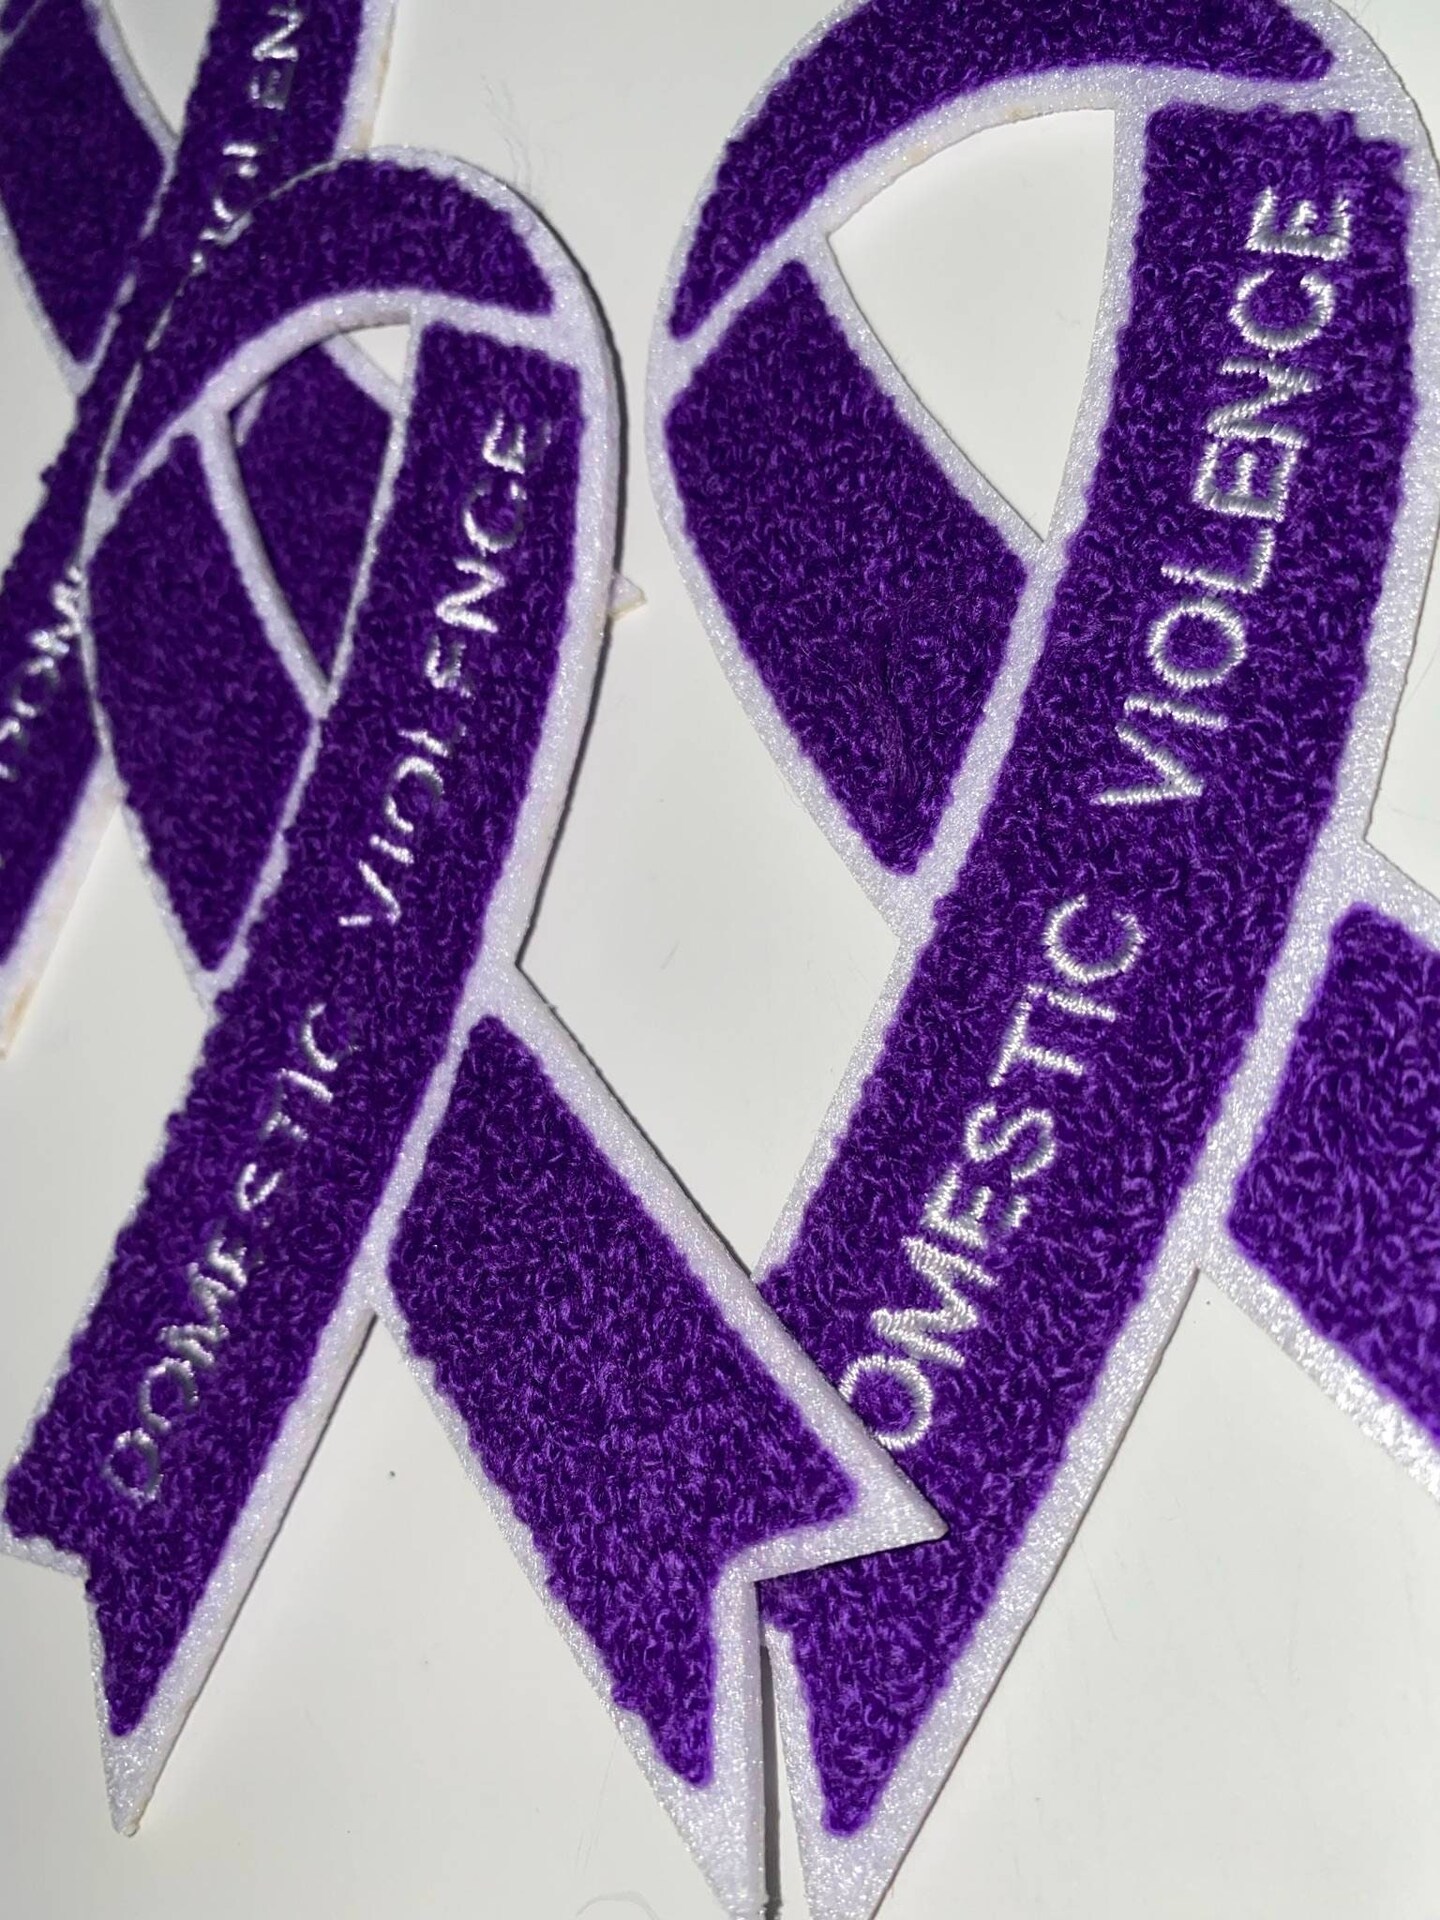 Domestic Violence: &#x22;Purple Chenille&#x22; Awareness Ribbon Patch, Iron or Sew-on, 5.5&#x22; inches